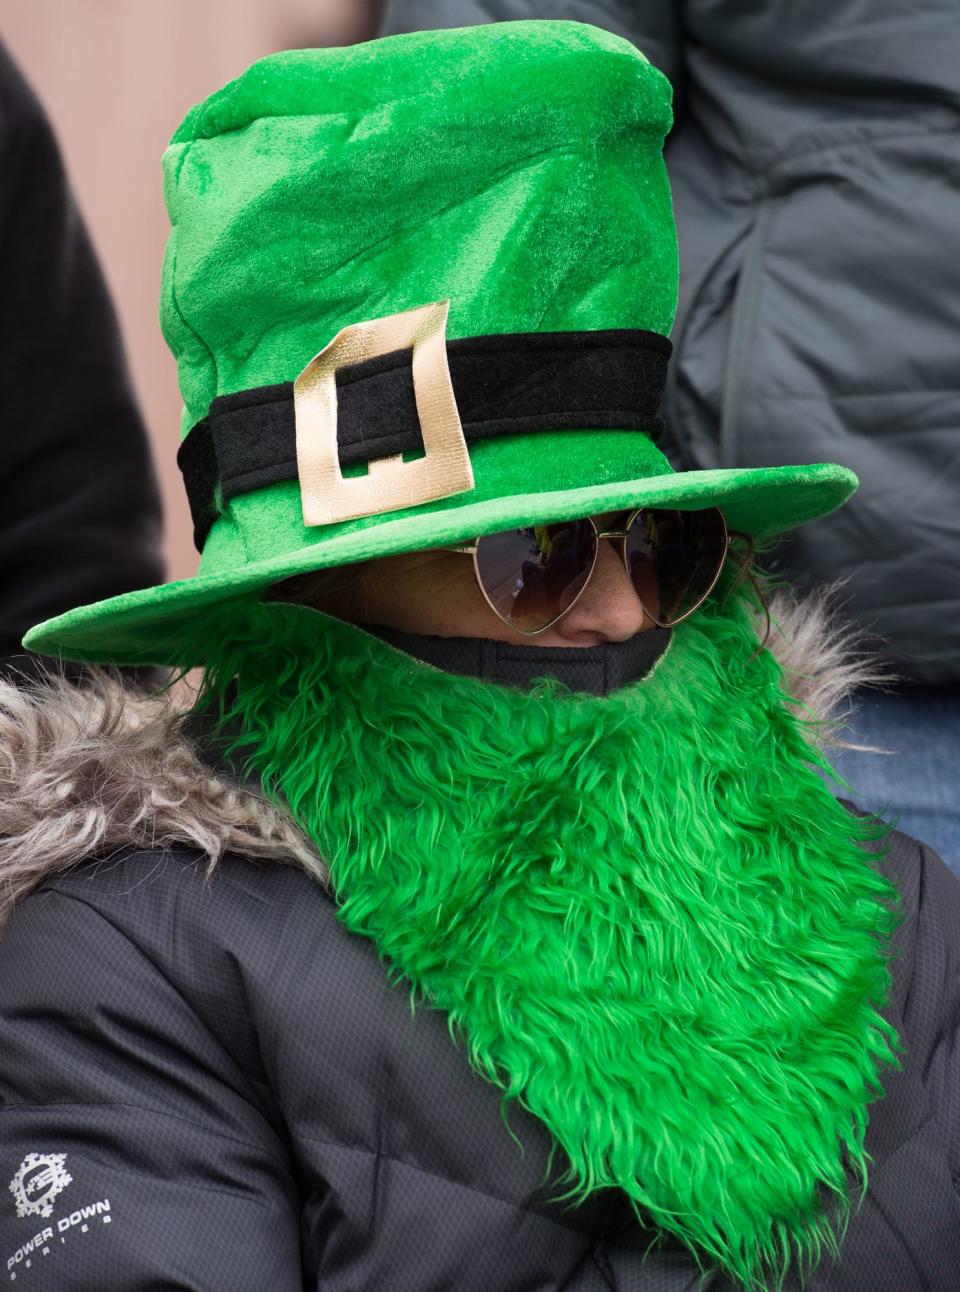 Dover St. Patrick's Day Parade always brings out colorful characters downtown.